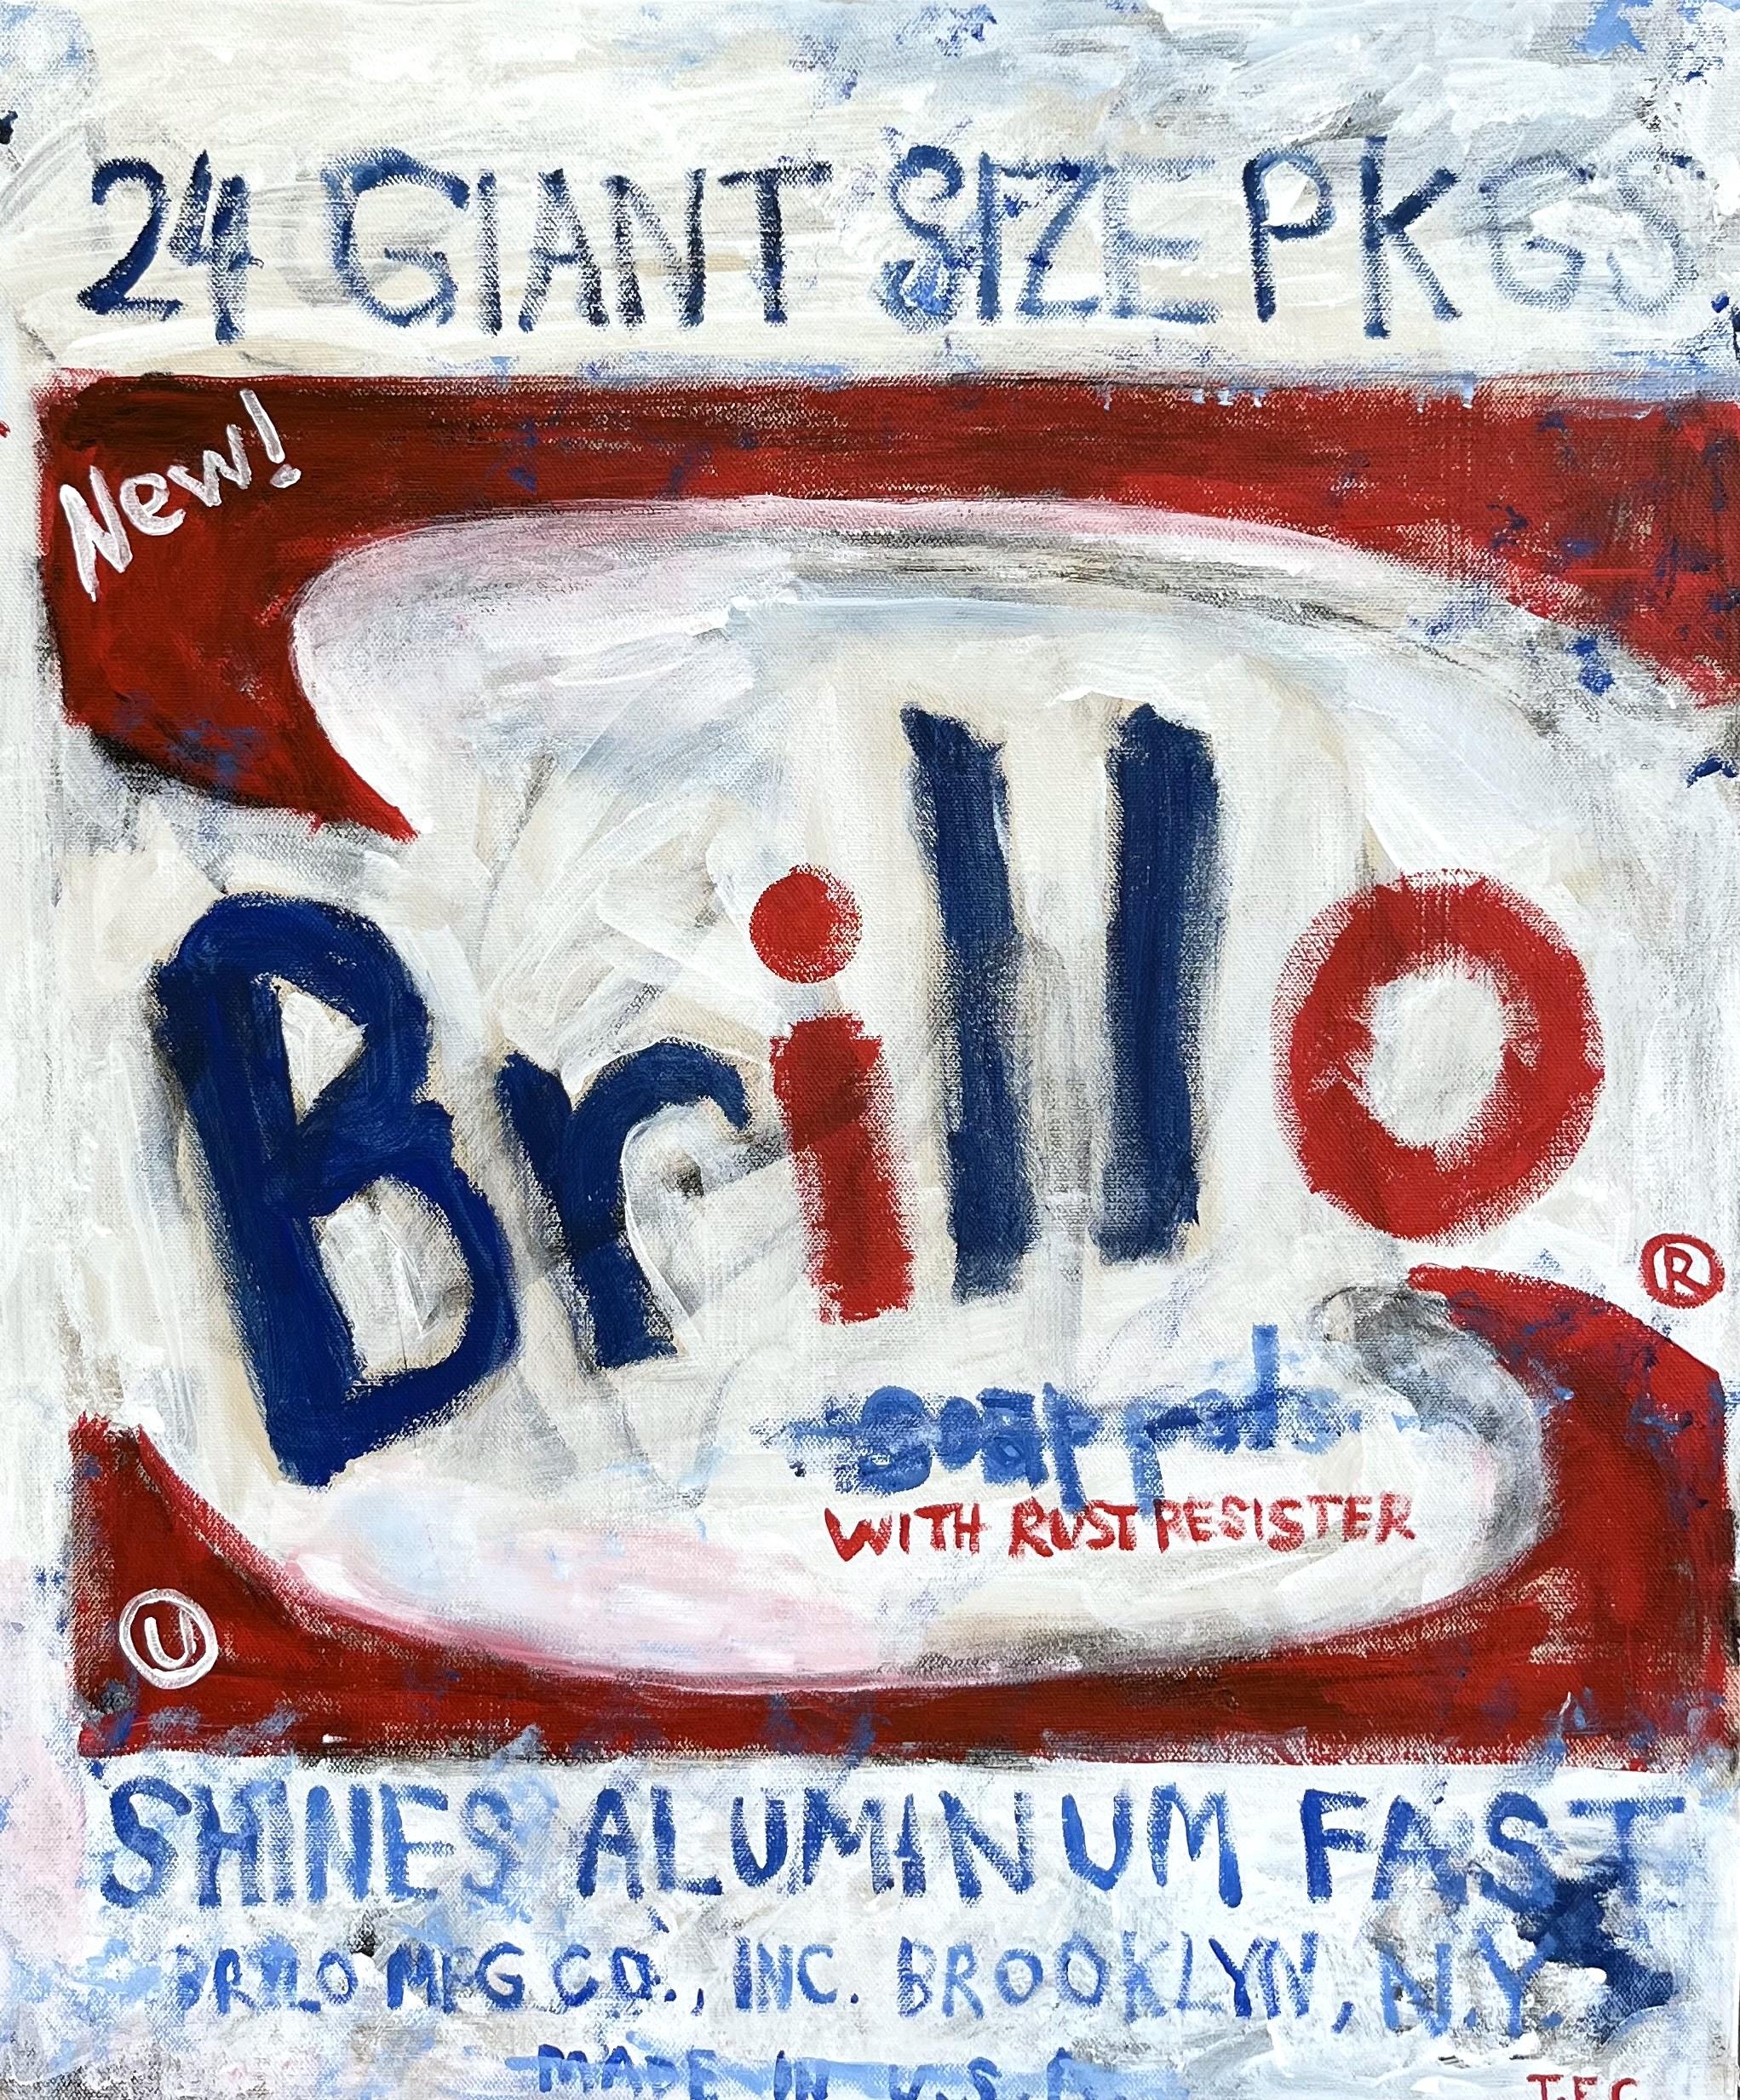 "Brillo" Contemporary Abstract Andy Warhol Inspired Pop Art Painting